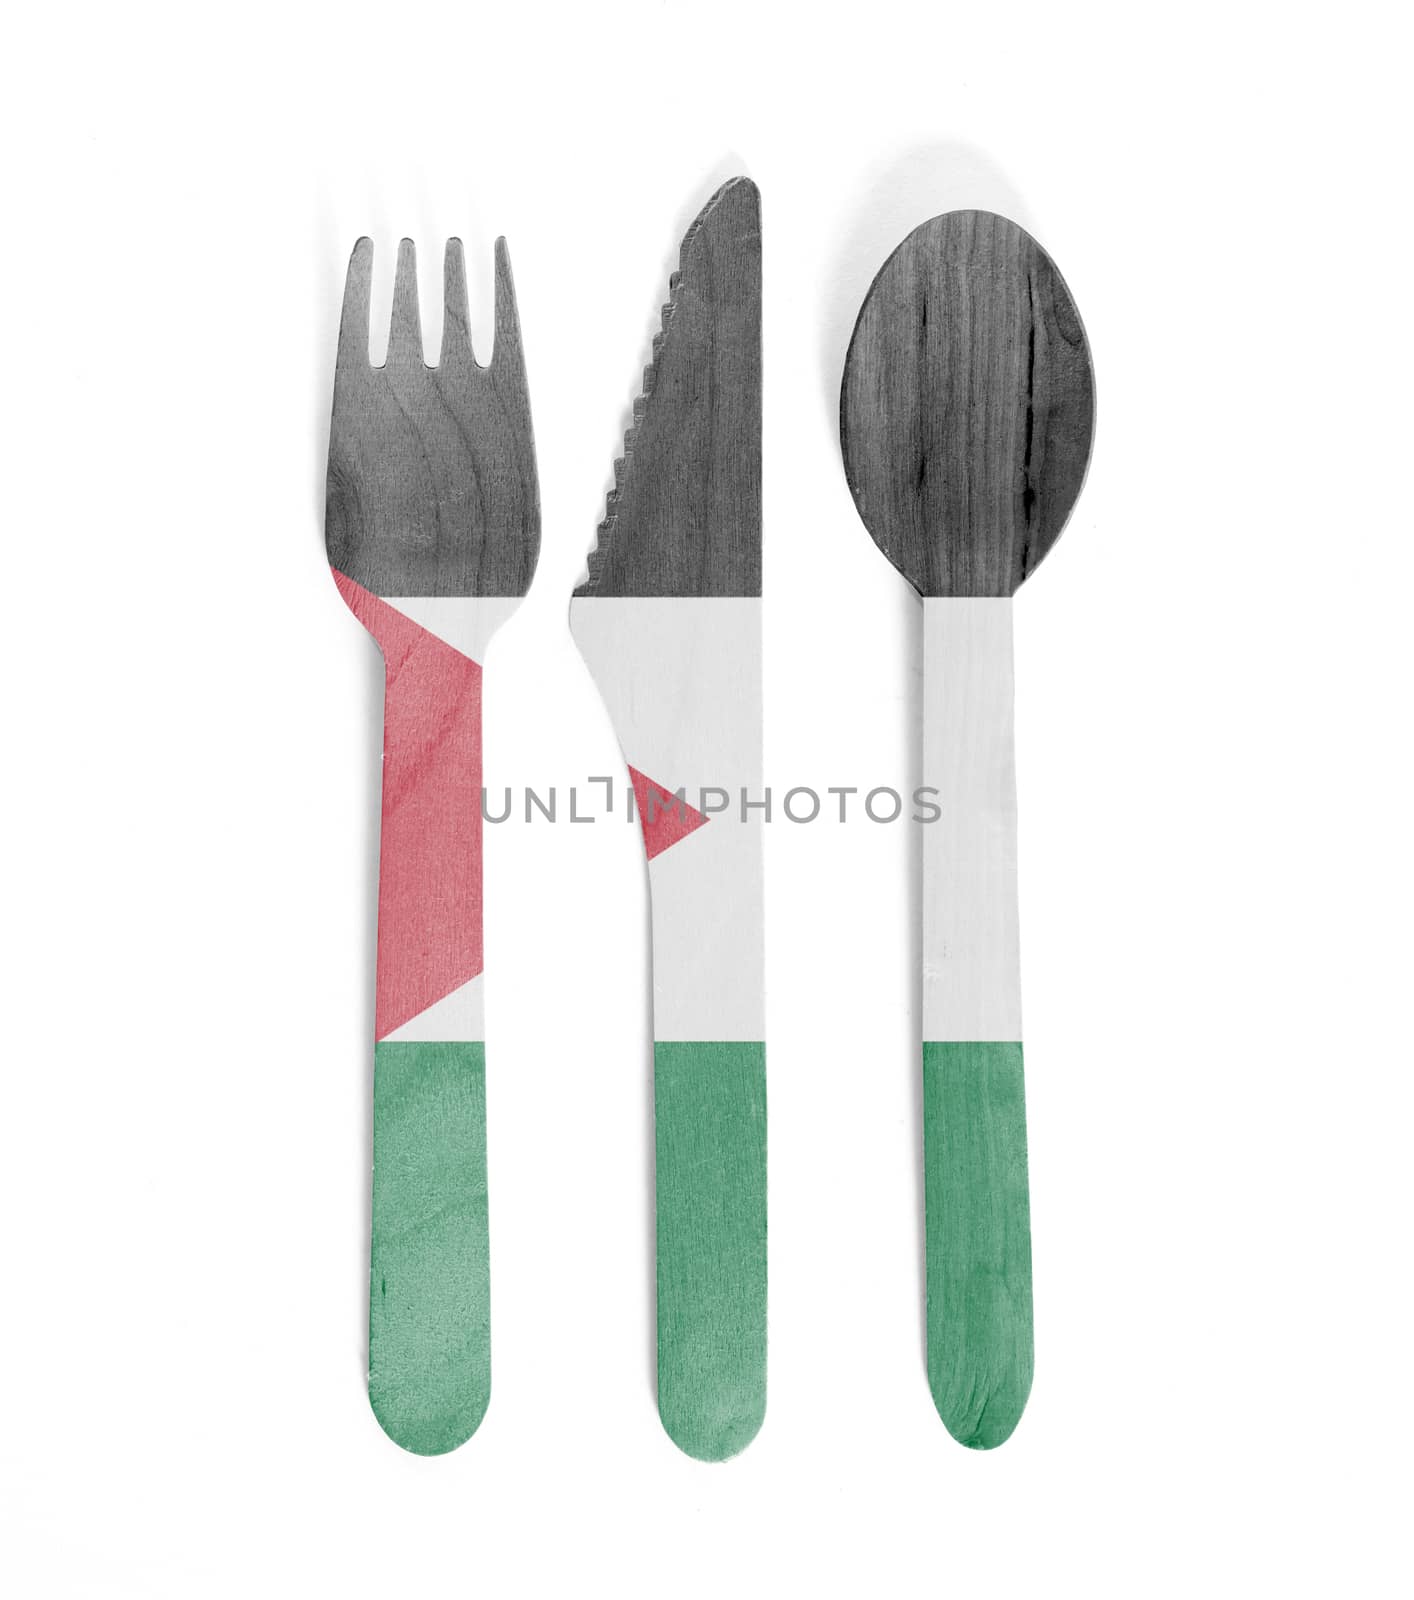 Eco friendly wooden cutlery - Plastic free concept - Isolated - Flag of Jordan